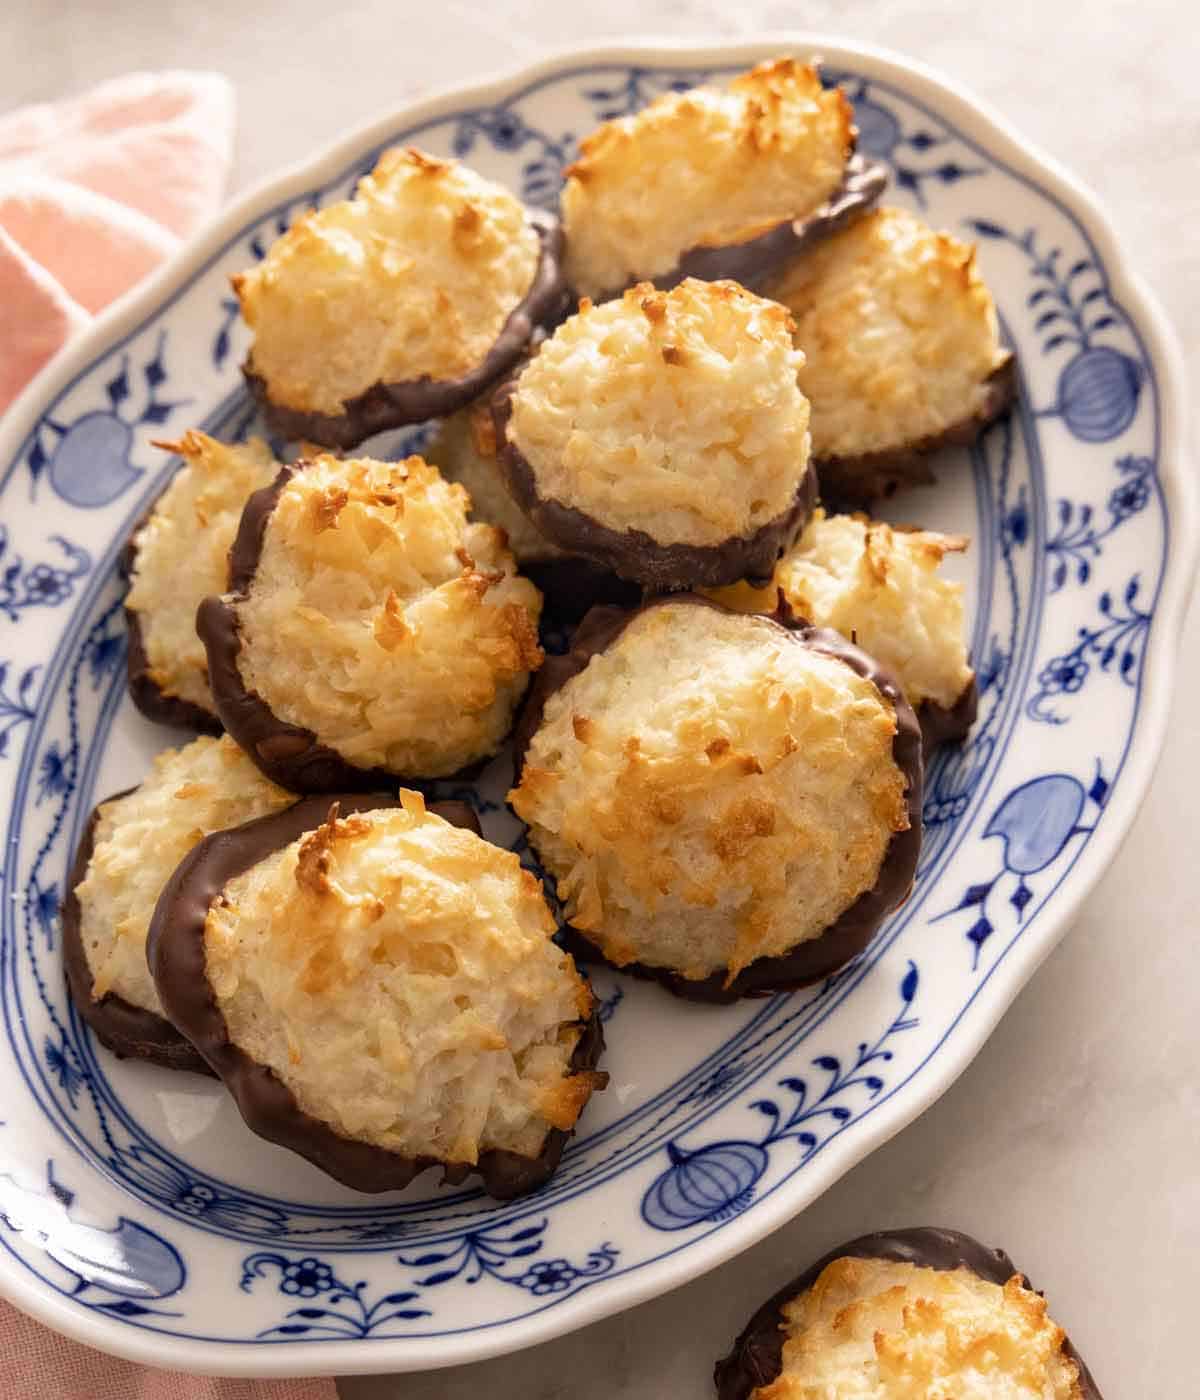 A platter of coconut macaroons.